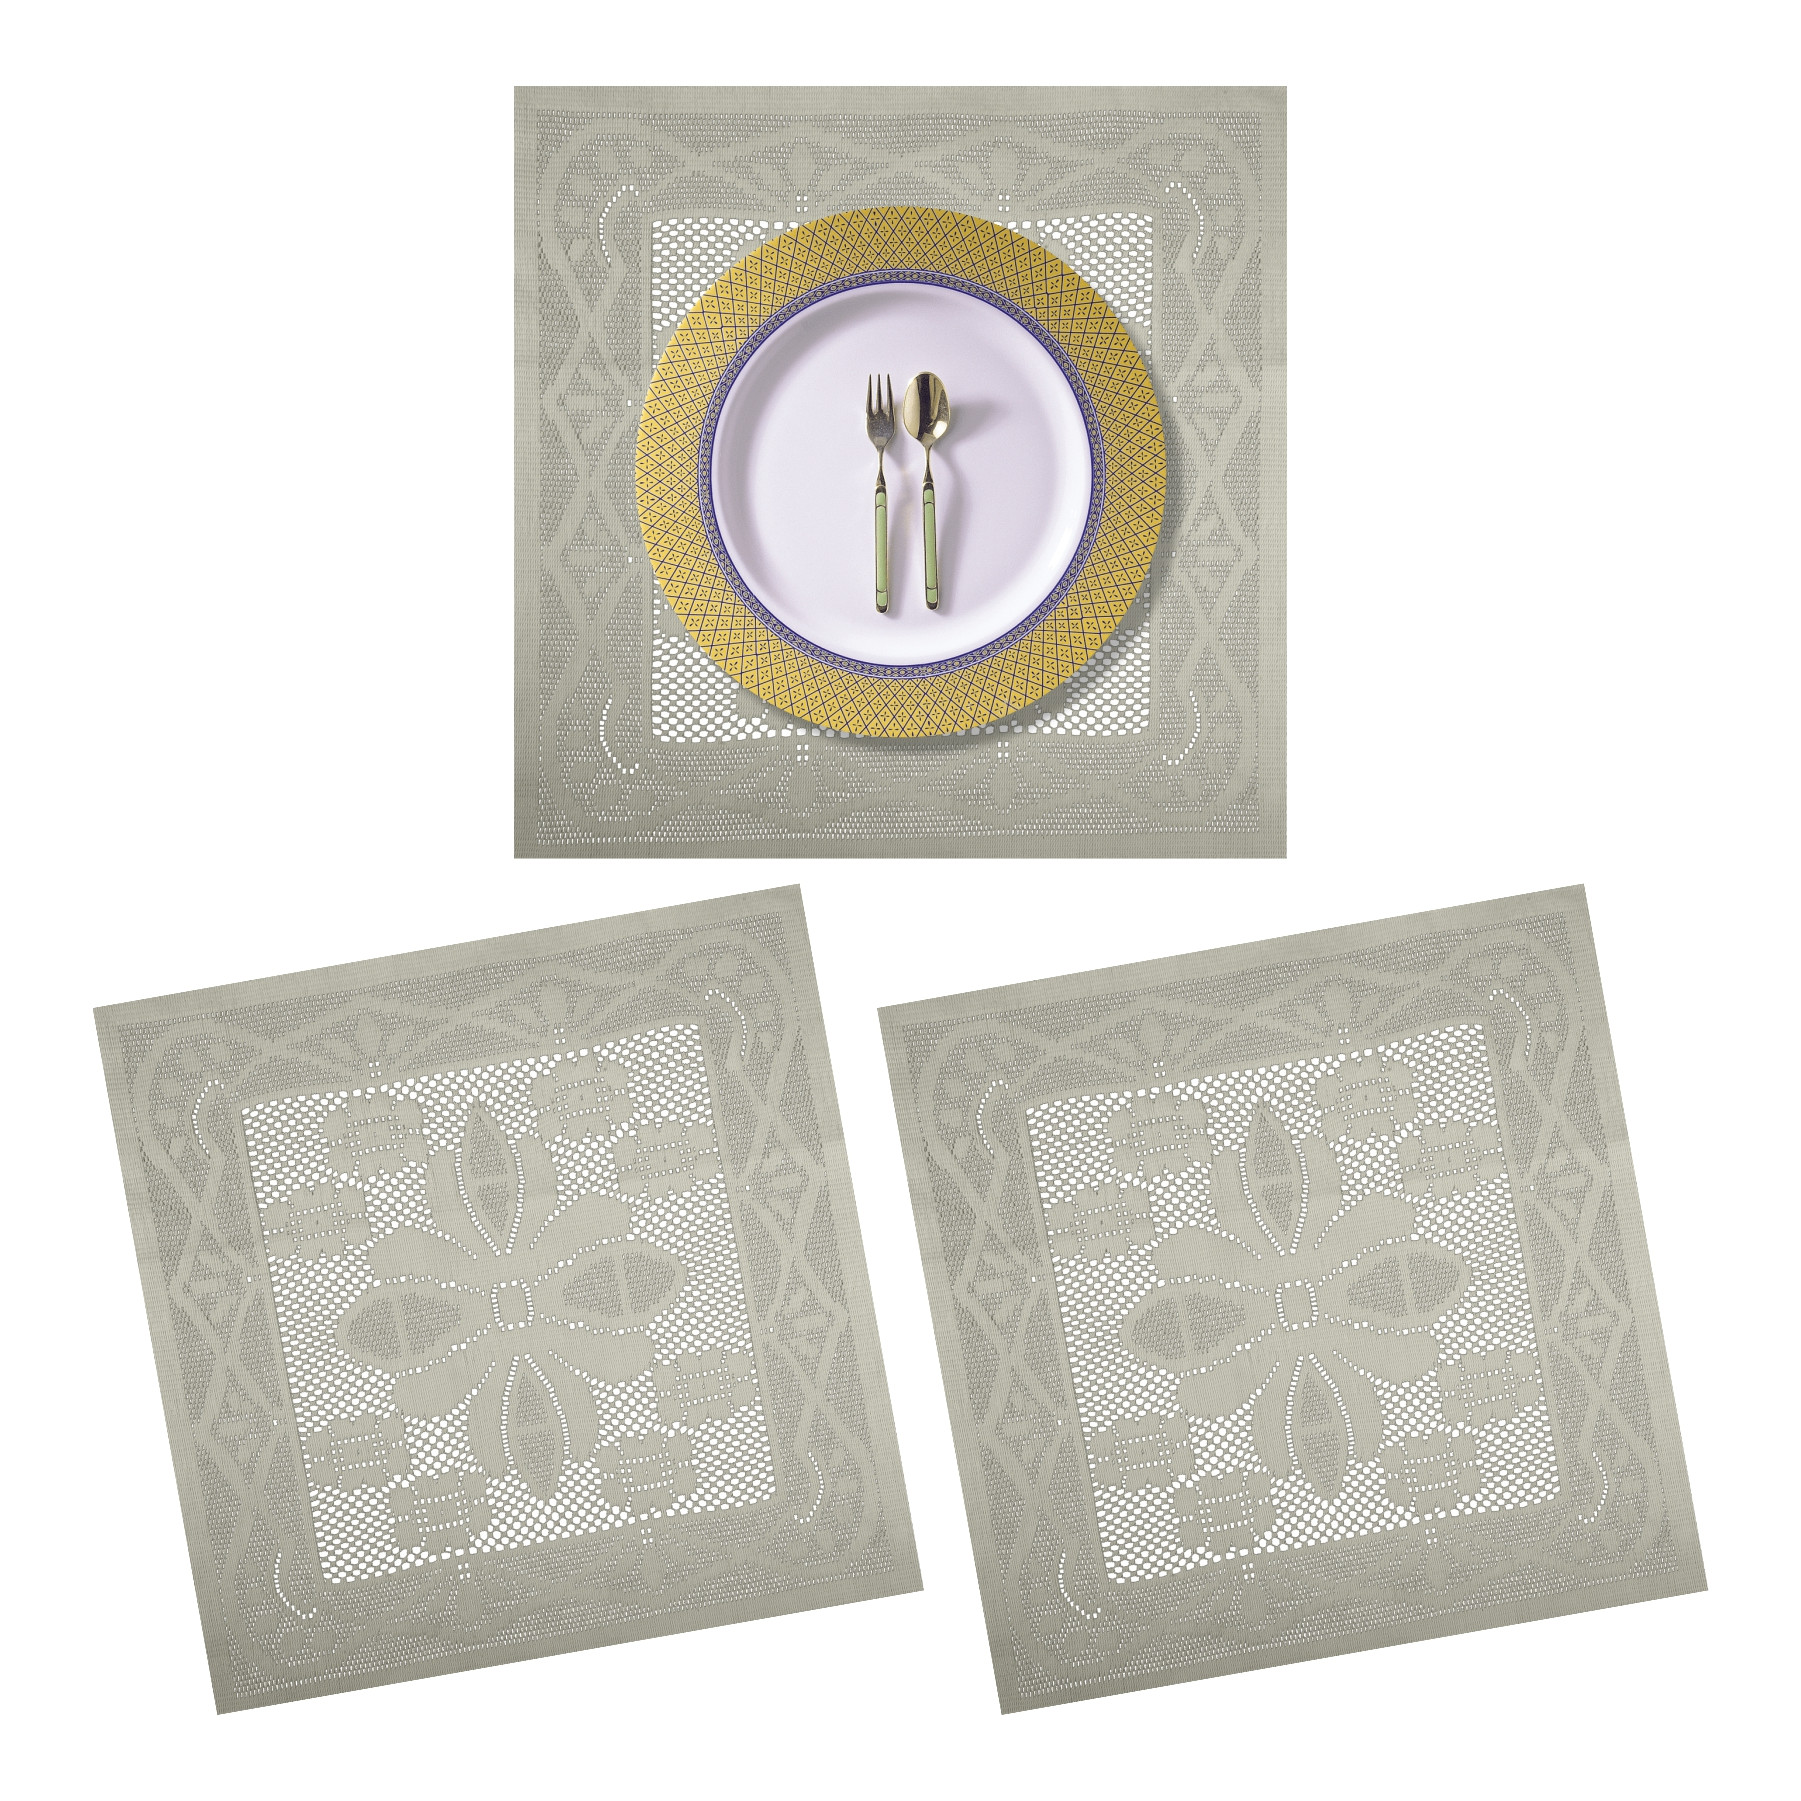 Kuber Industries Placemat | Dining Table Placemat | Center Table Mats | Square Plain Net Placemat Set | Side Table Placemats for Hotel-Home Décor | 20 Inch |Cream